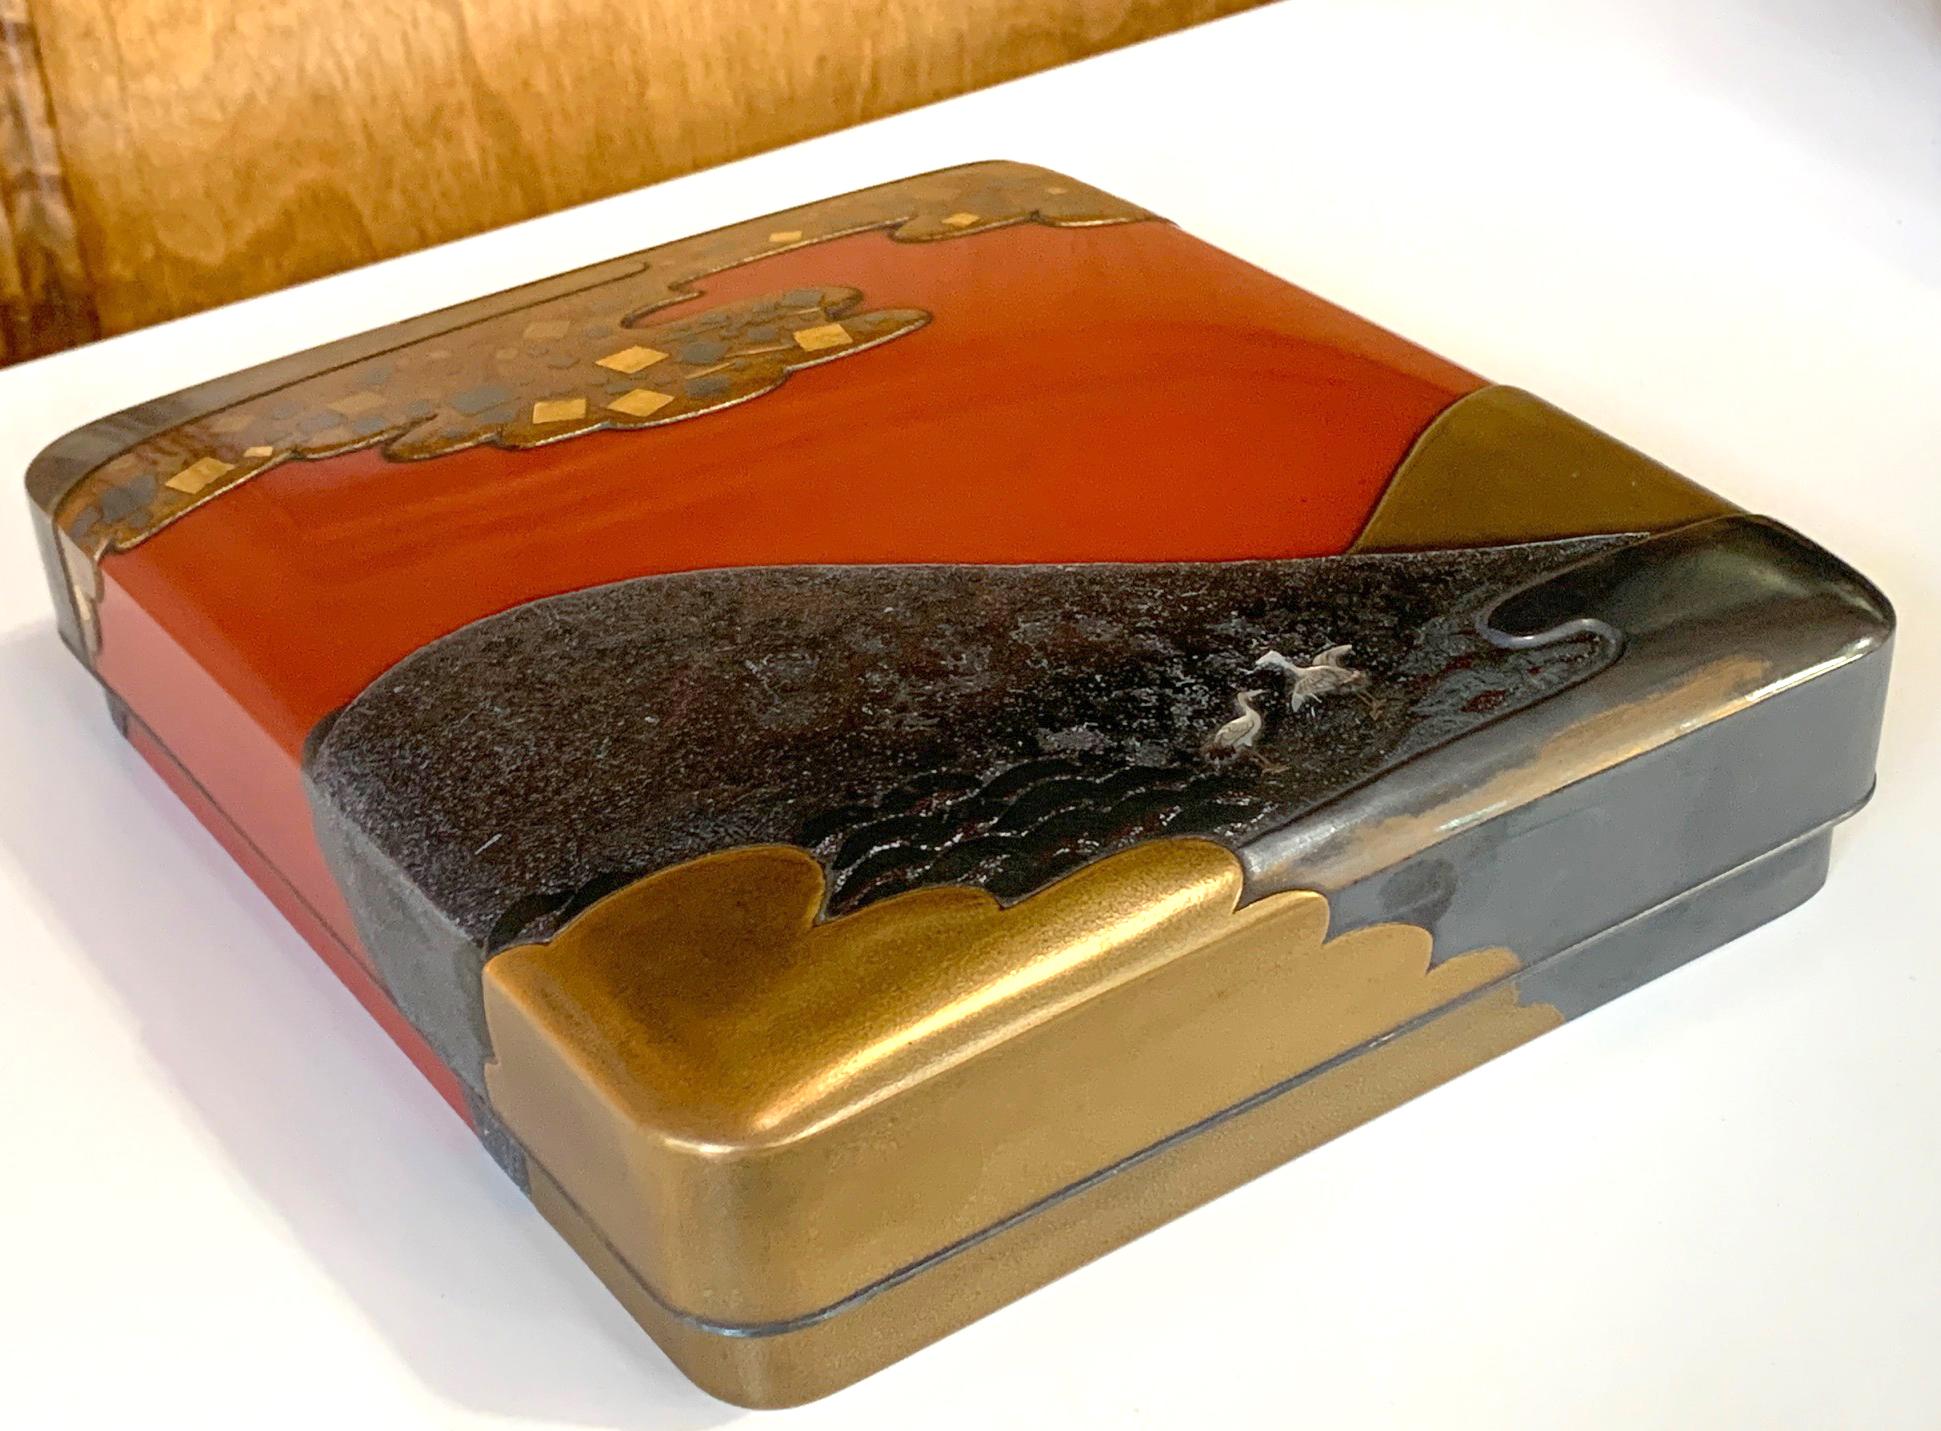 A striking and finely lacquered Suzuribako (writing box) with ink stone and bronze waterdrop from Japan circa late Meiji to early Taisho period (1900-1920s). Among a US collection purchased from a Christie's sale in 1997, the suzuribako has rounded